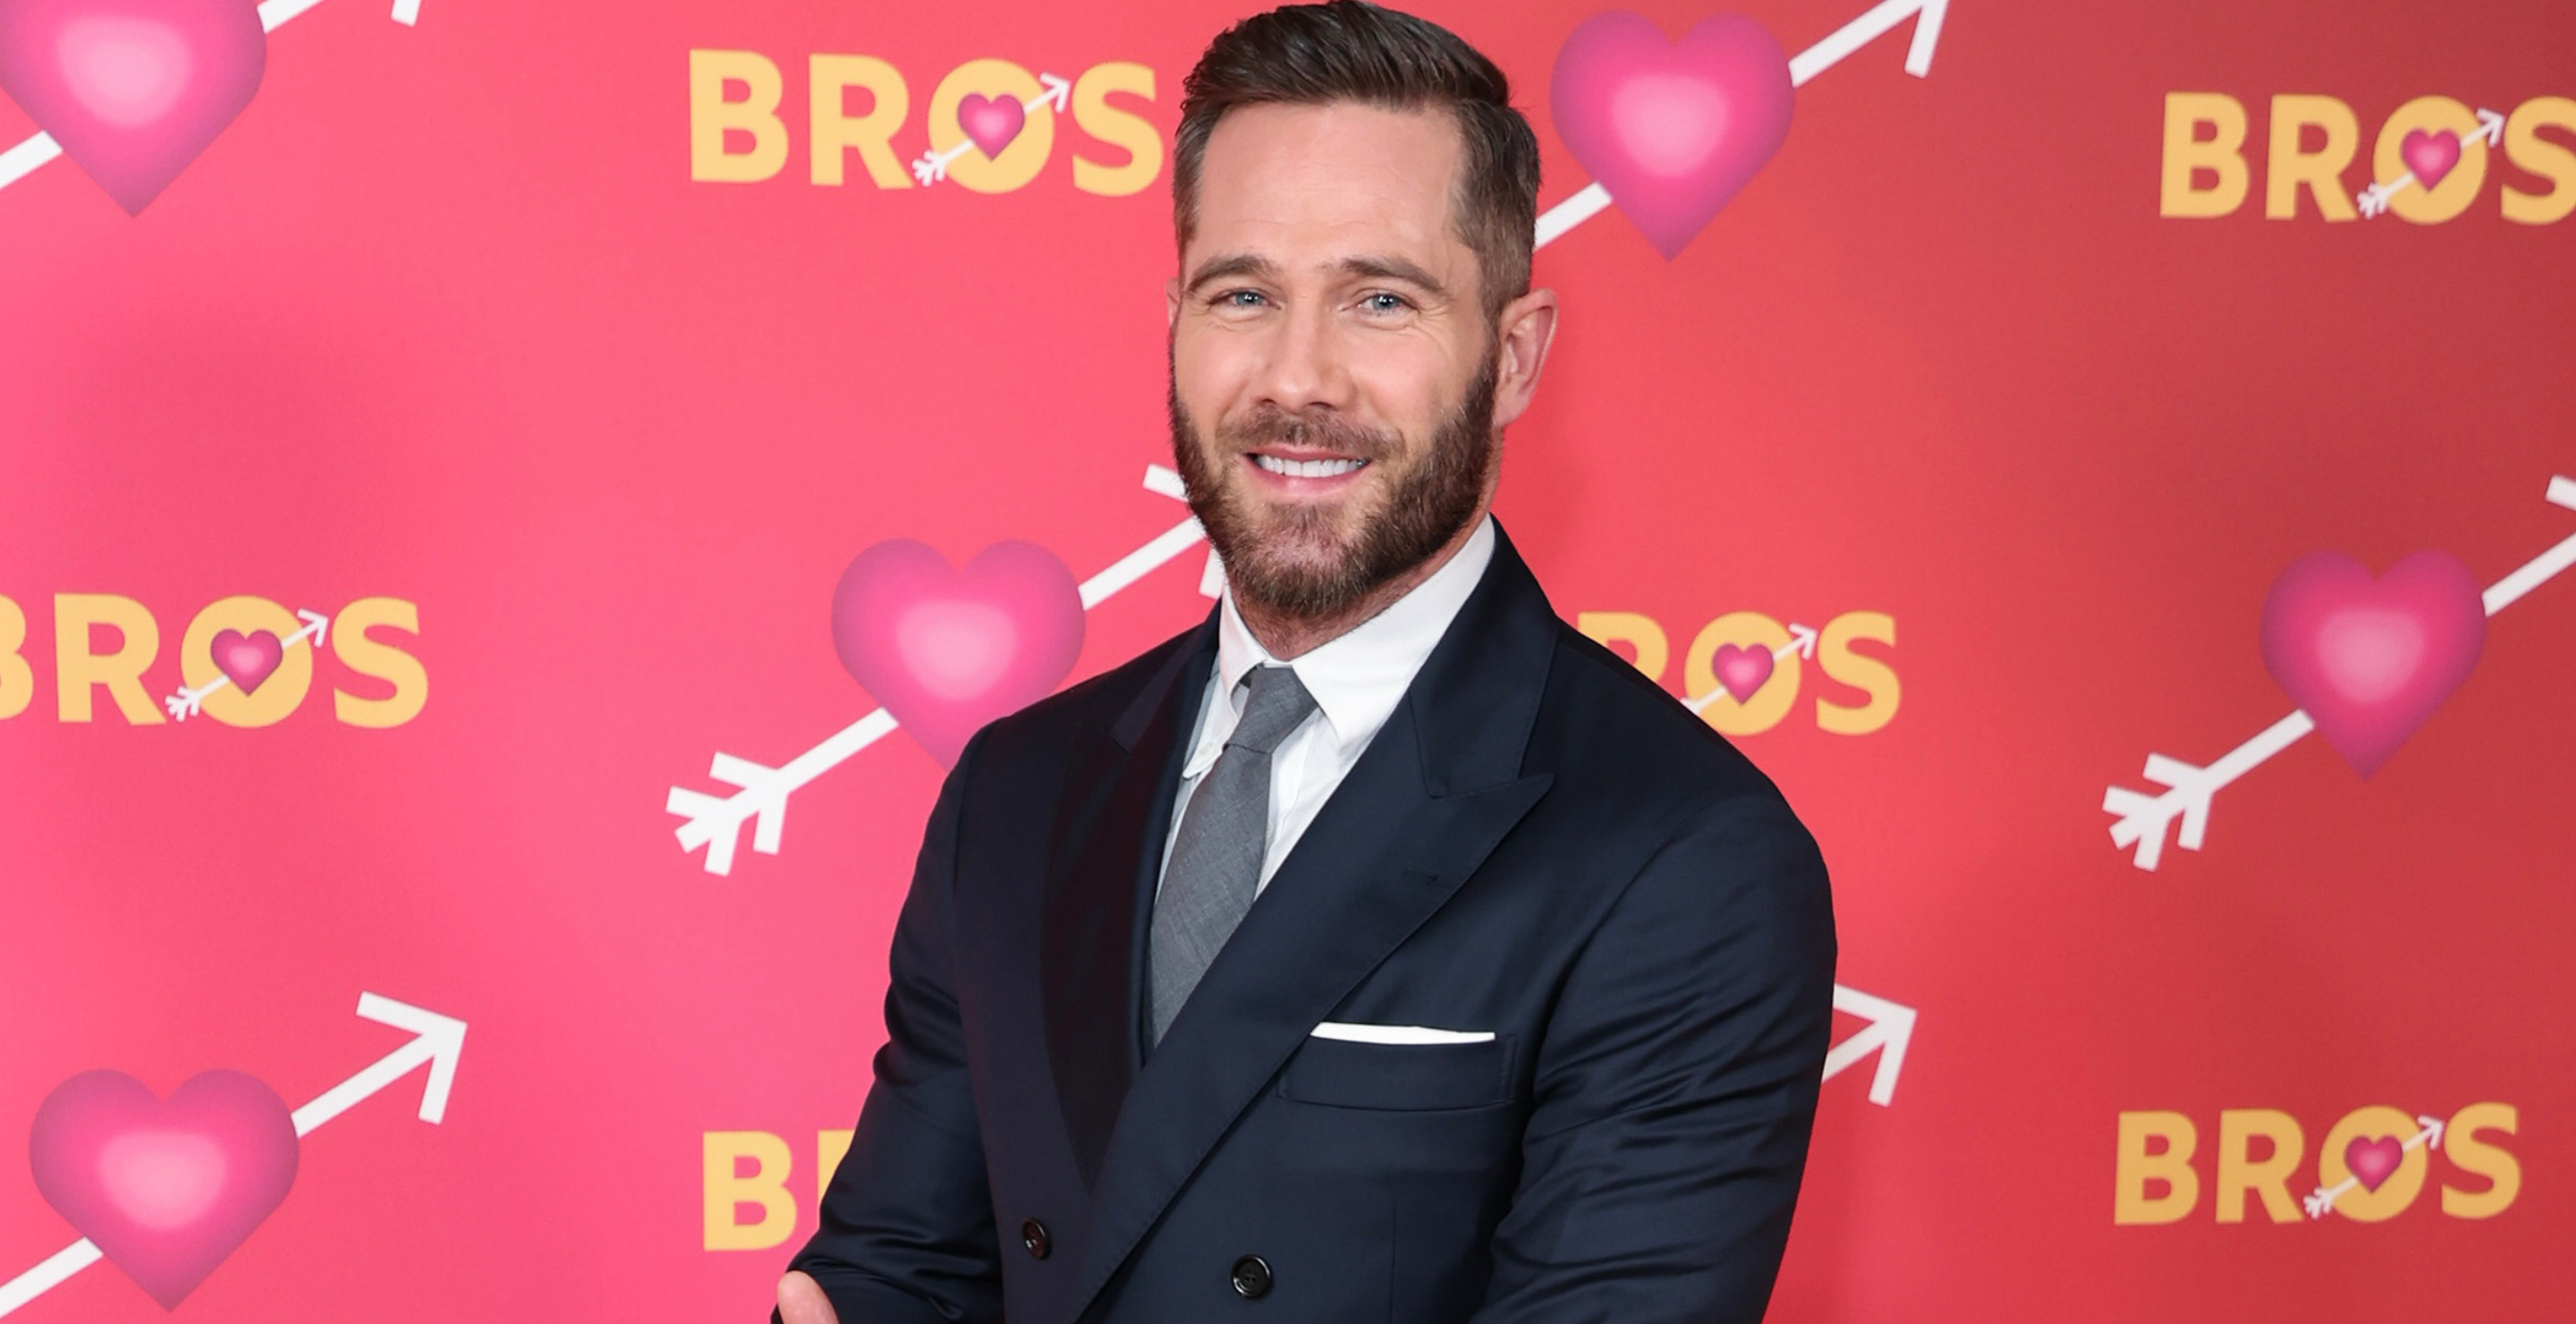 Luke Macfarlane attends the UK special screening of "Bros" at Picturehouse Central on October 26, 2022 in London, England.